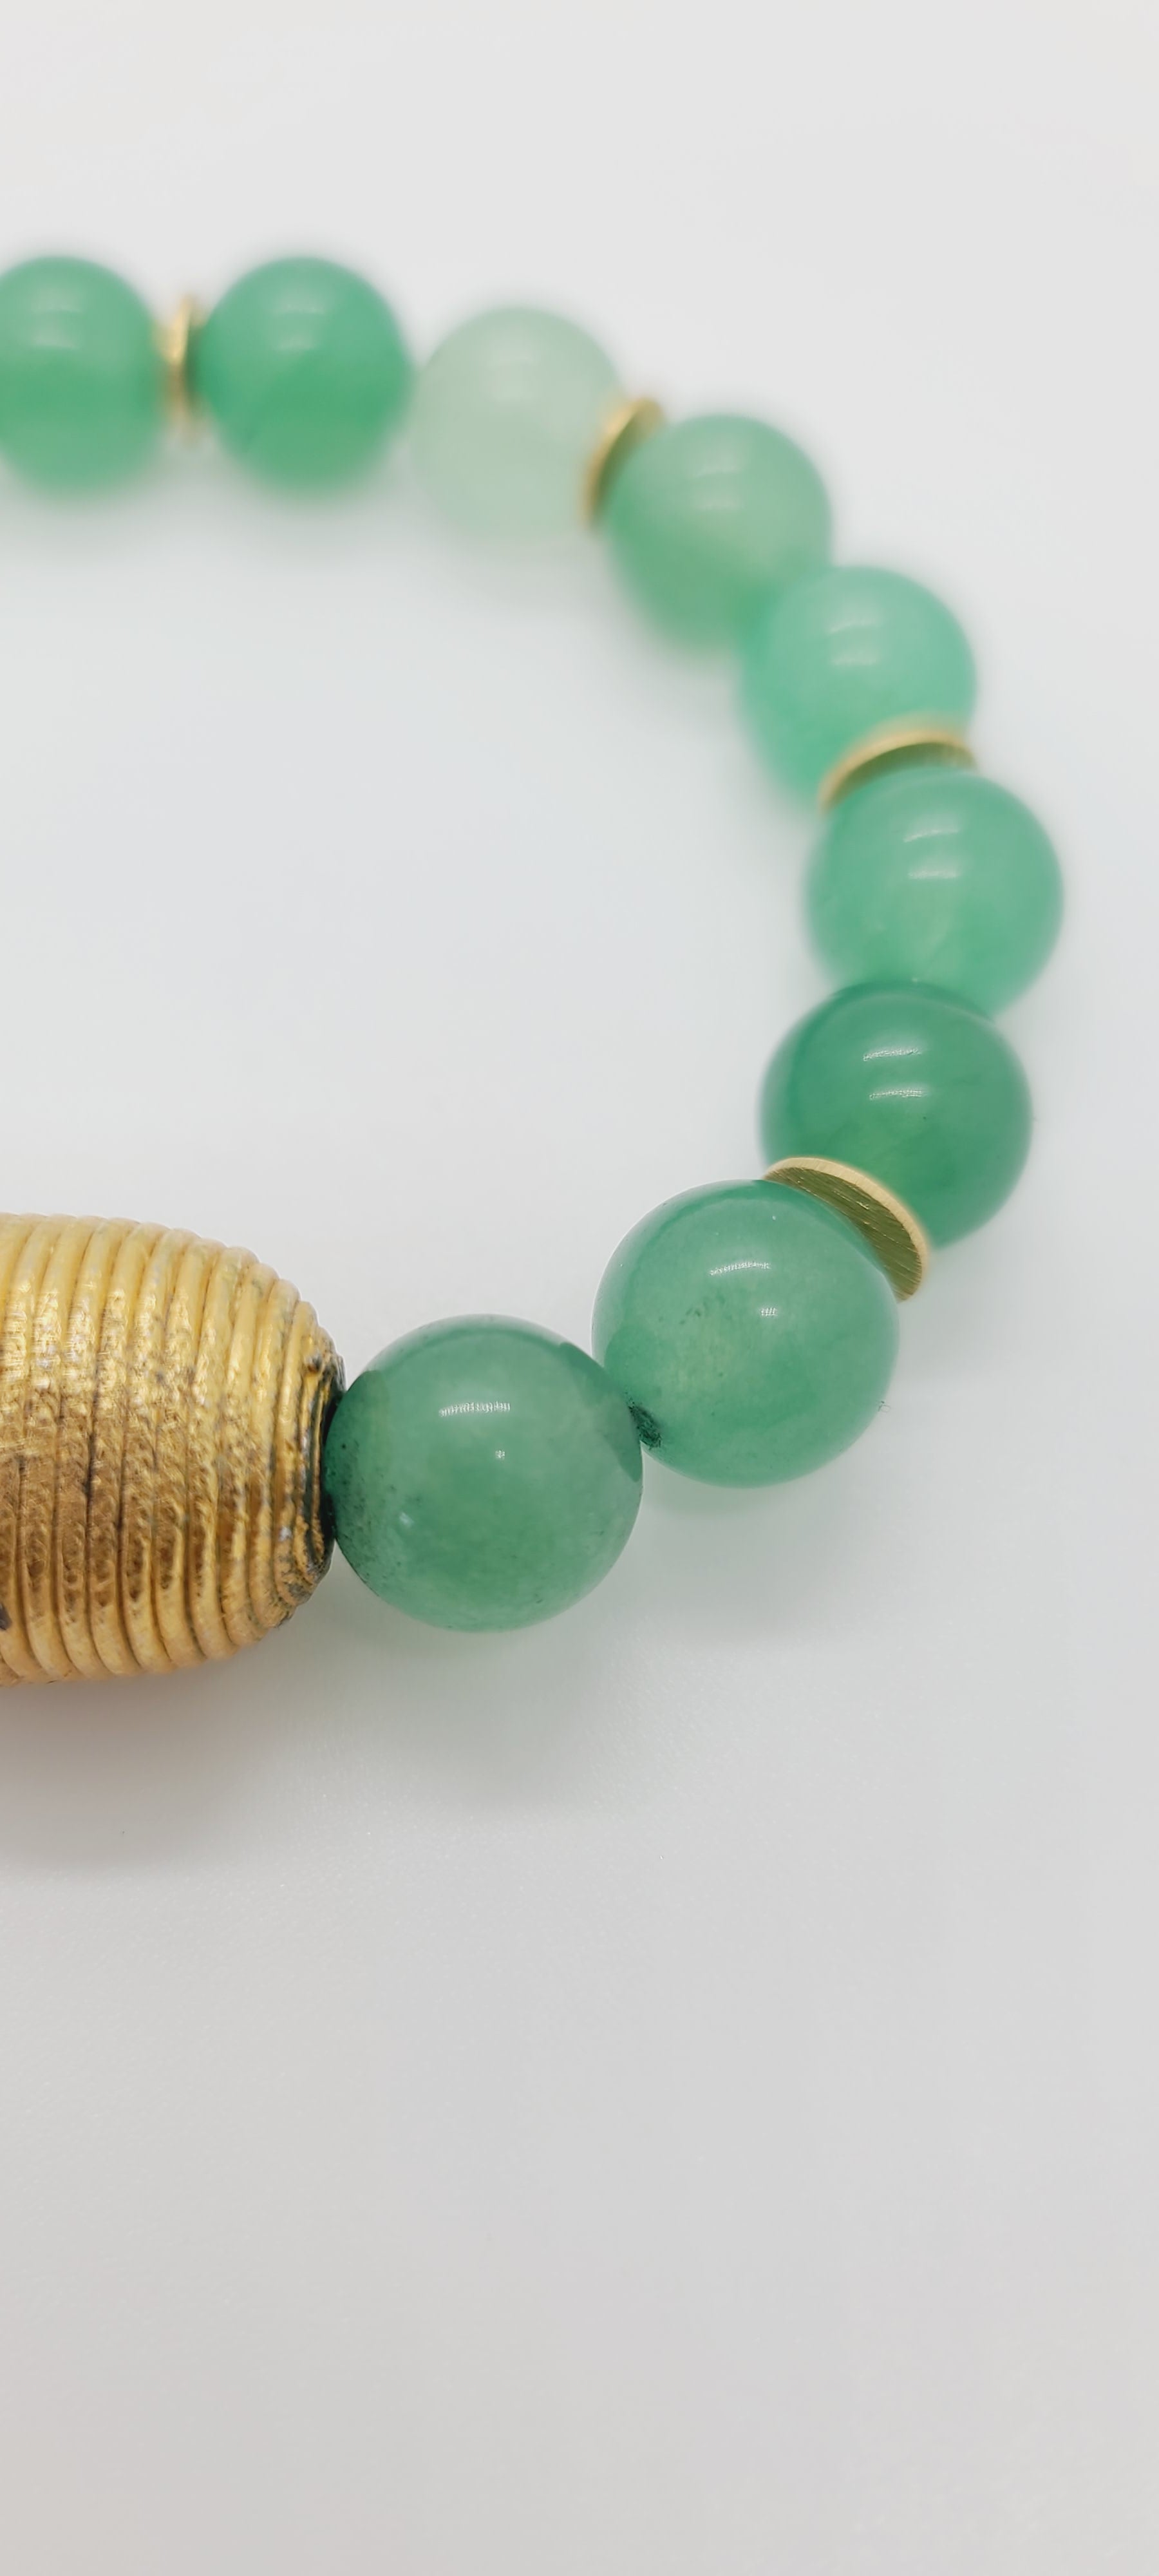 Length: 7.75 inches | Weight: 1.9 ounces  Distinctly You! This bracelet is made with 12mm seafoam green glass beads, with accents of gold spacers and Cameroon gold charm